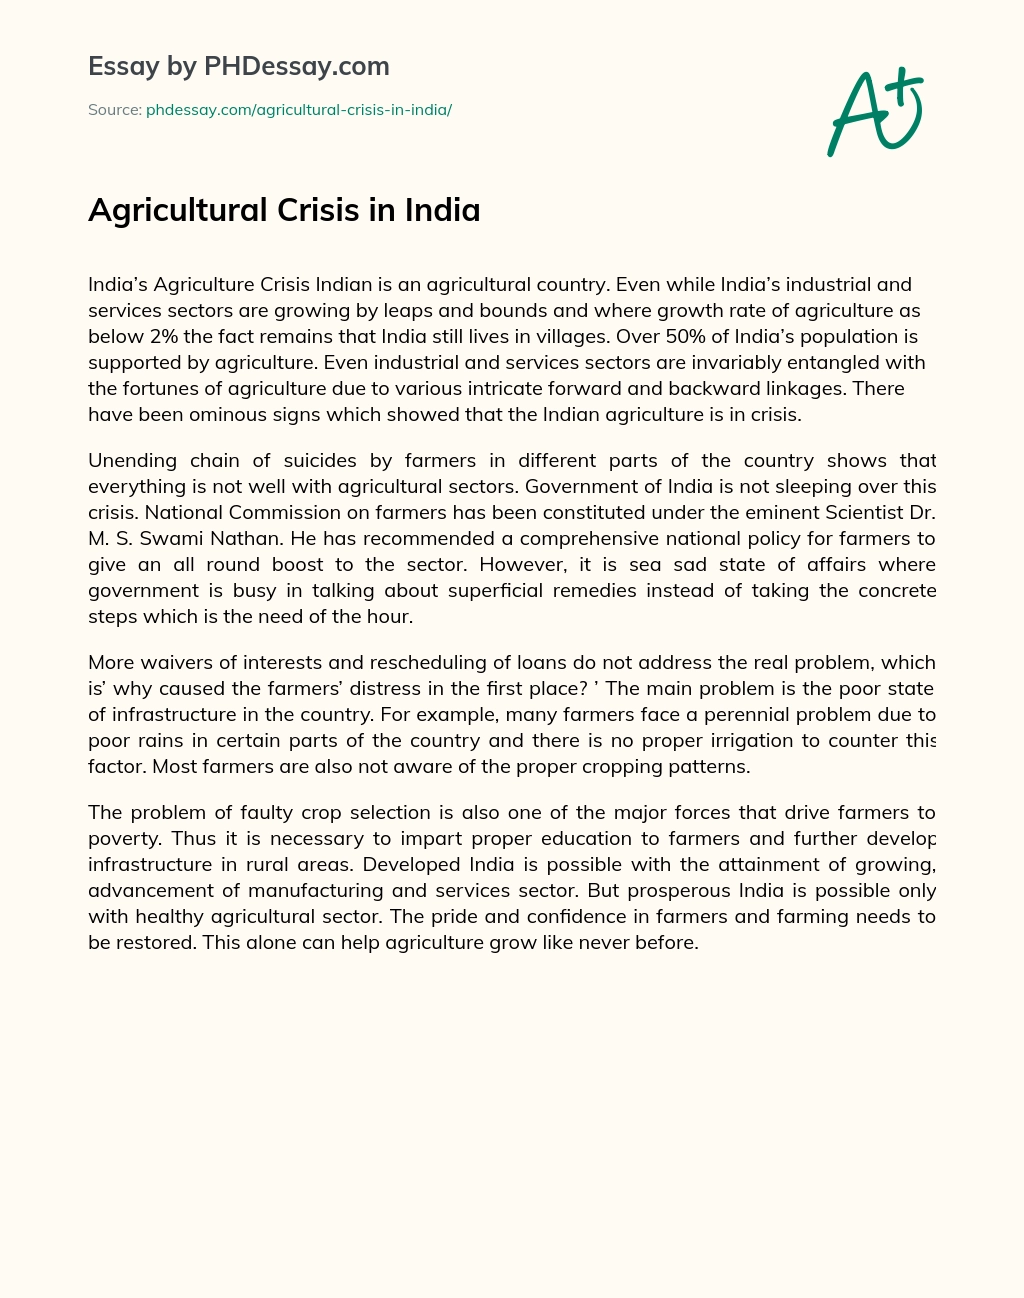 Agricultural Crisis in India essay